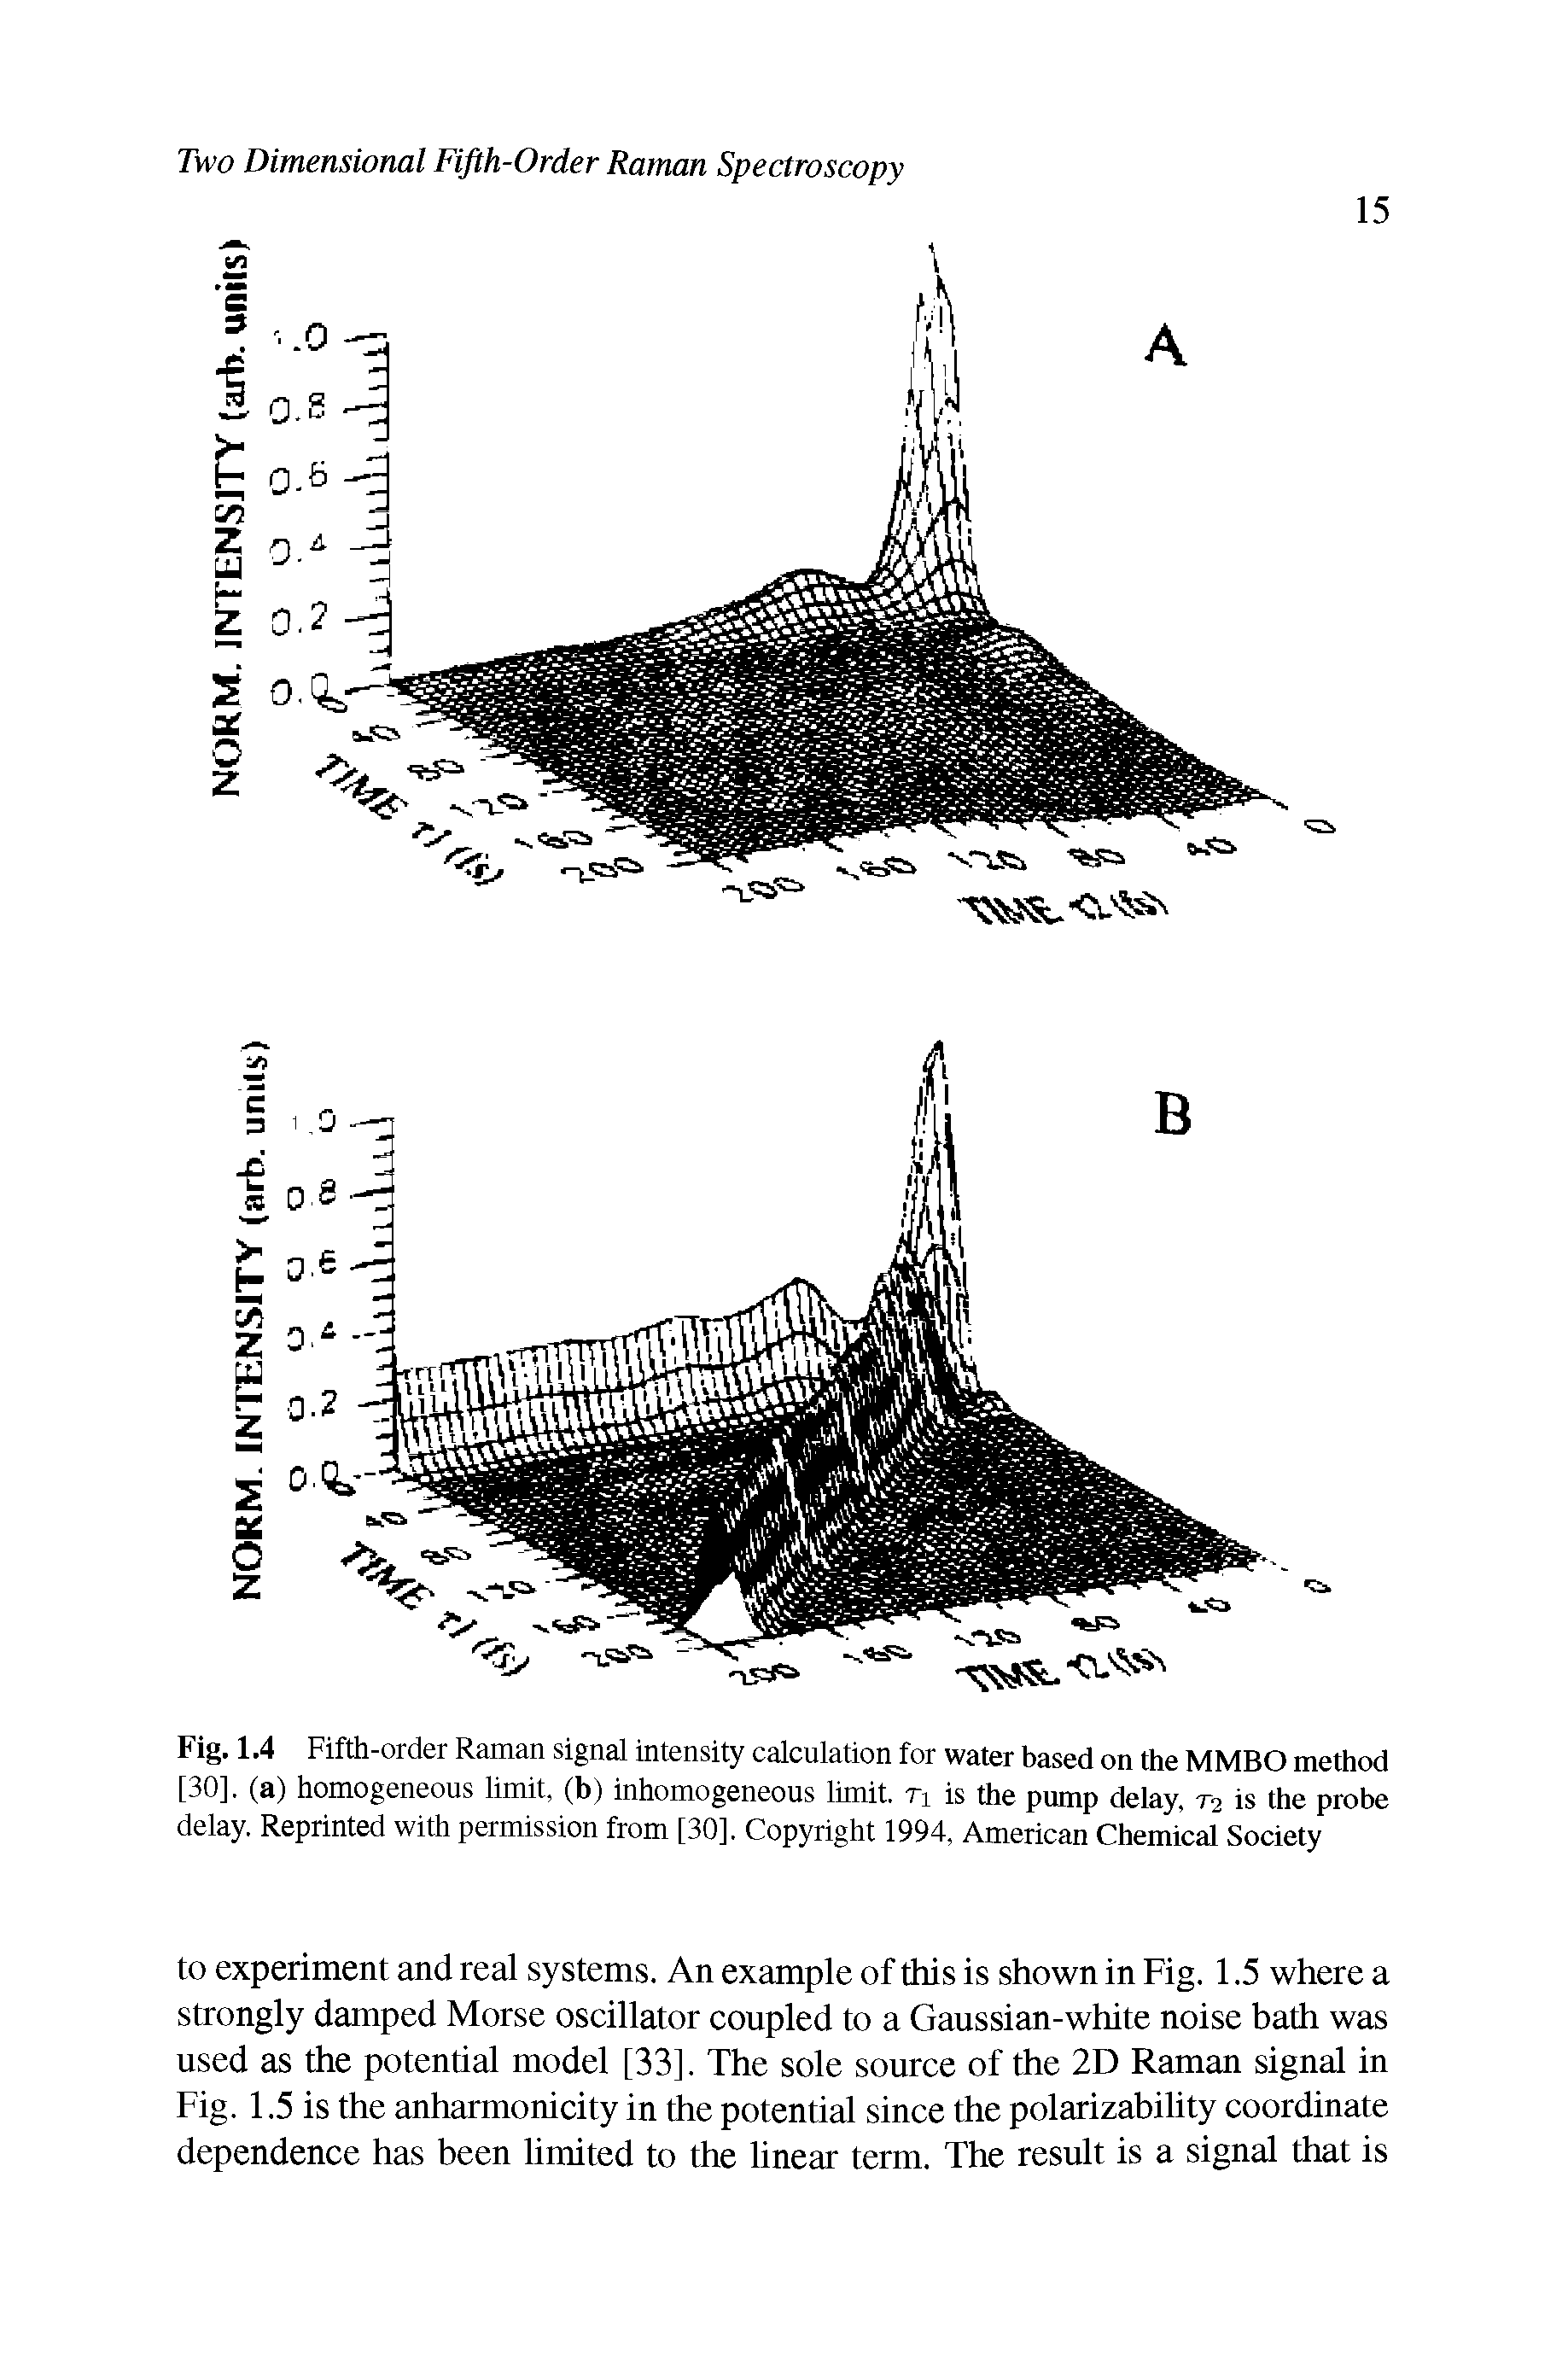 Fig. 1.4 Fifth-order Raman signal intensity calculation for water based on the MMBO method [30], (a) homogeneous limit, (b) inhomogeneous limit, n is the pump delay ra is the probe delay. Reprinted with permission from [30], Copyright 1994, American Chemical Society...